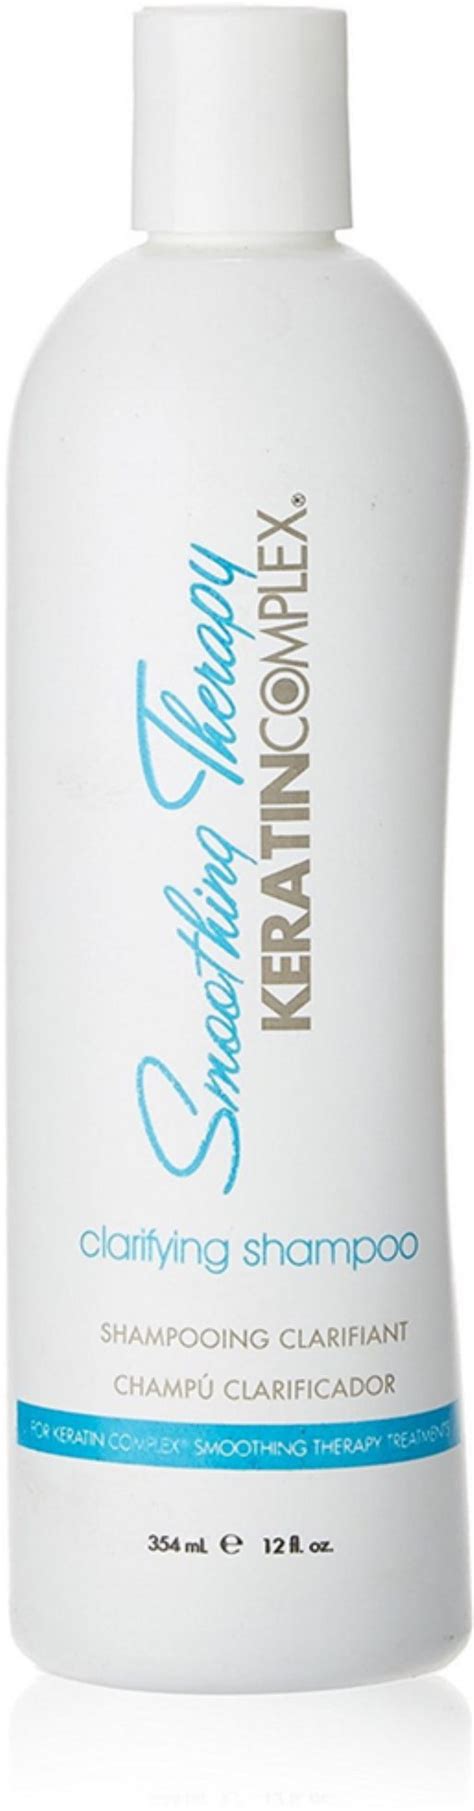 Keratin Complex 4 Pack Coppola Keratin Complex Smoothing Therapy